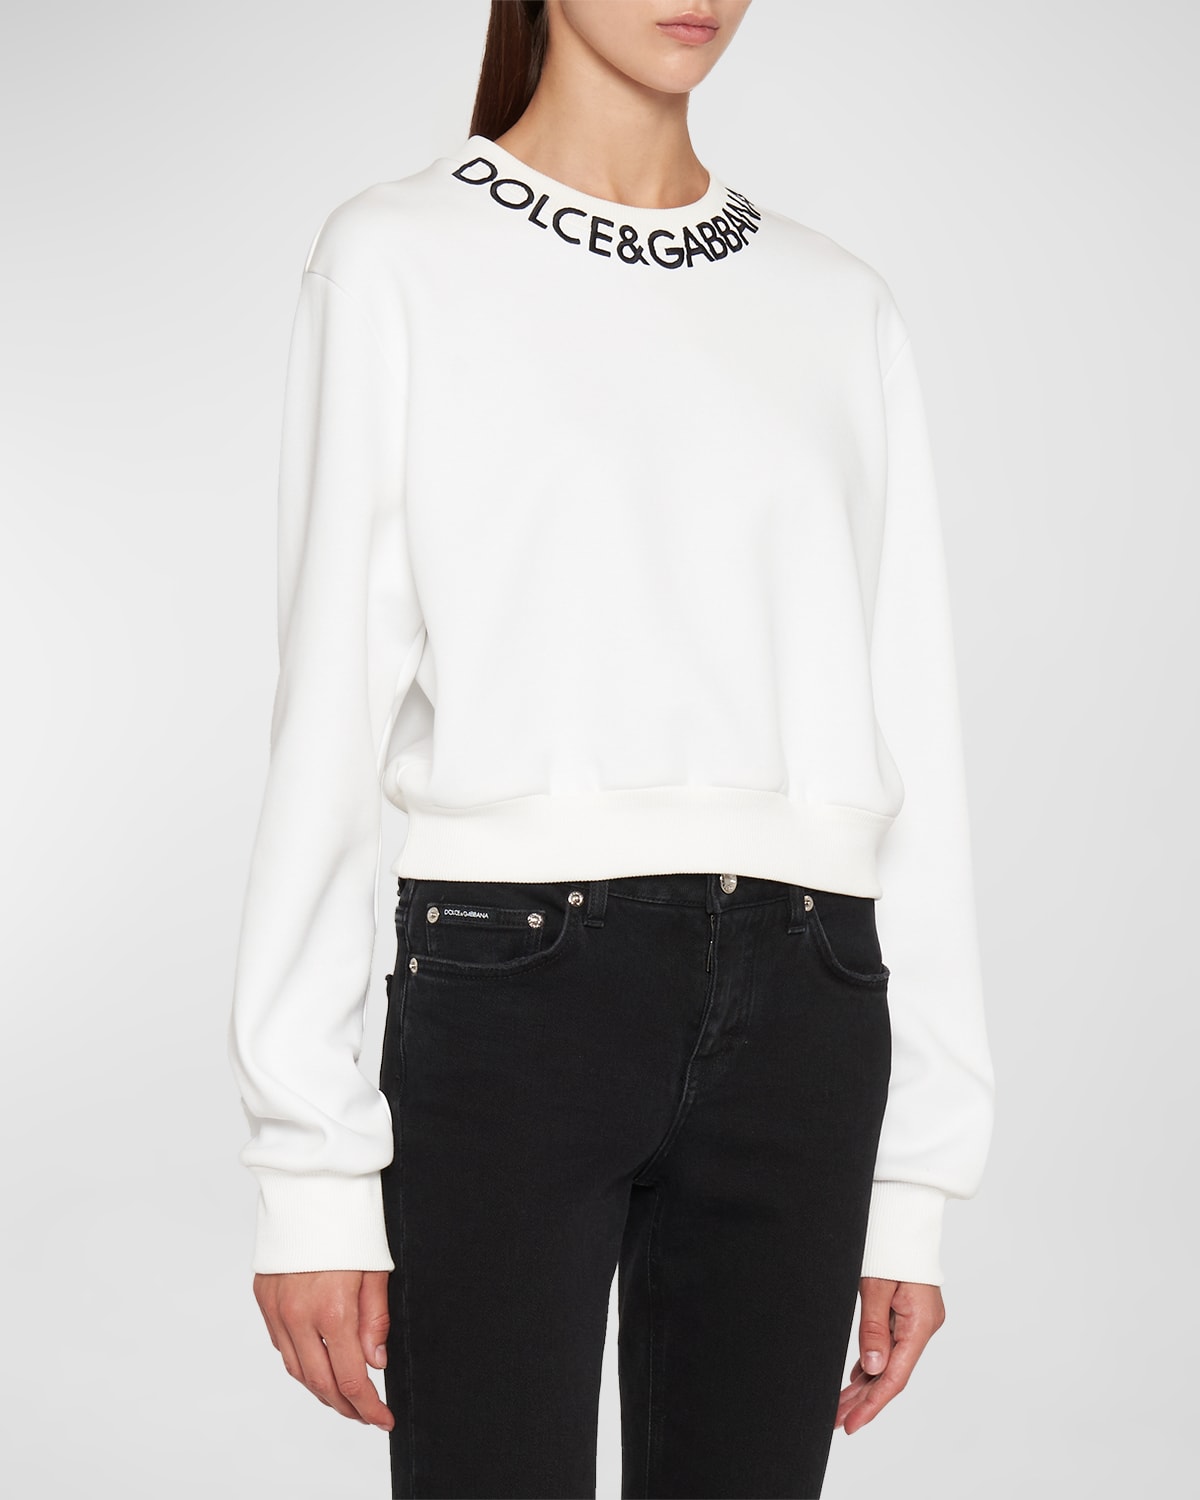 DOLCE & GABBANA JERSEY PULLOVER TOP WITH LOGO COLLAR